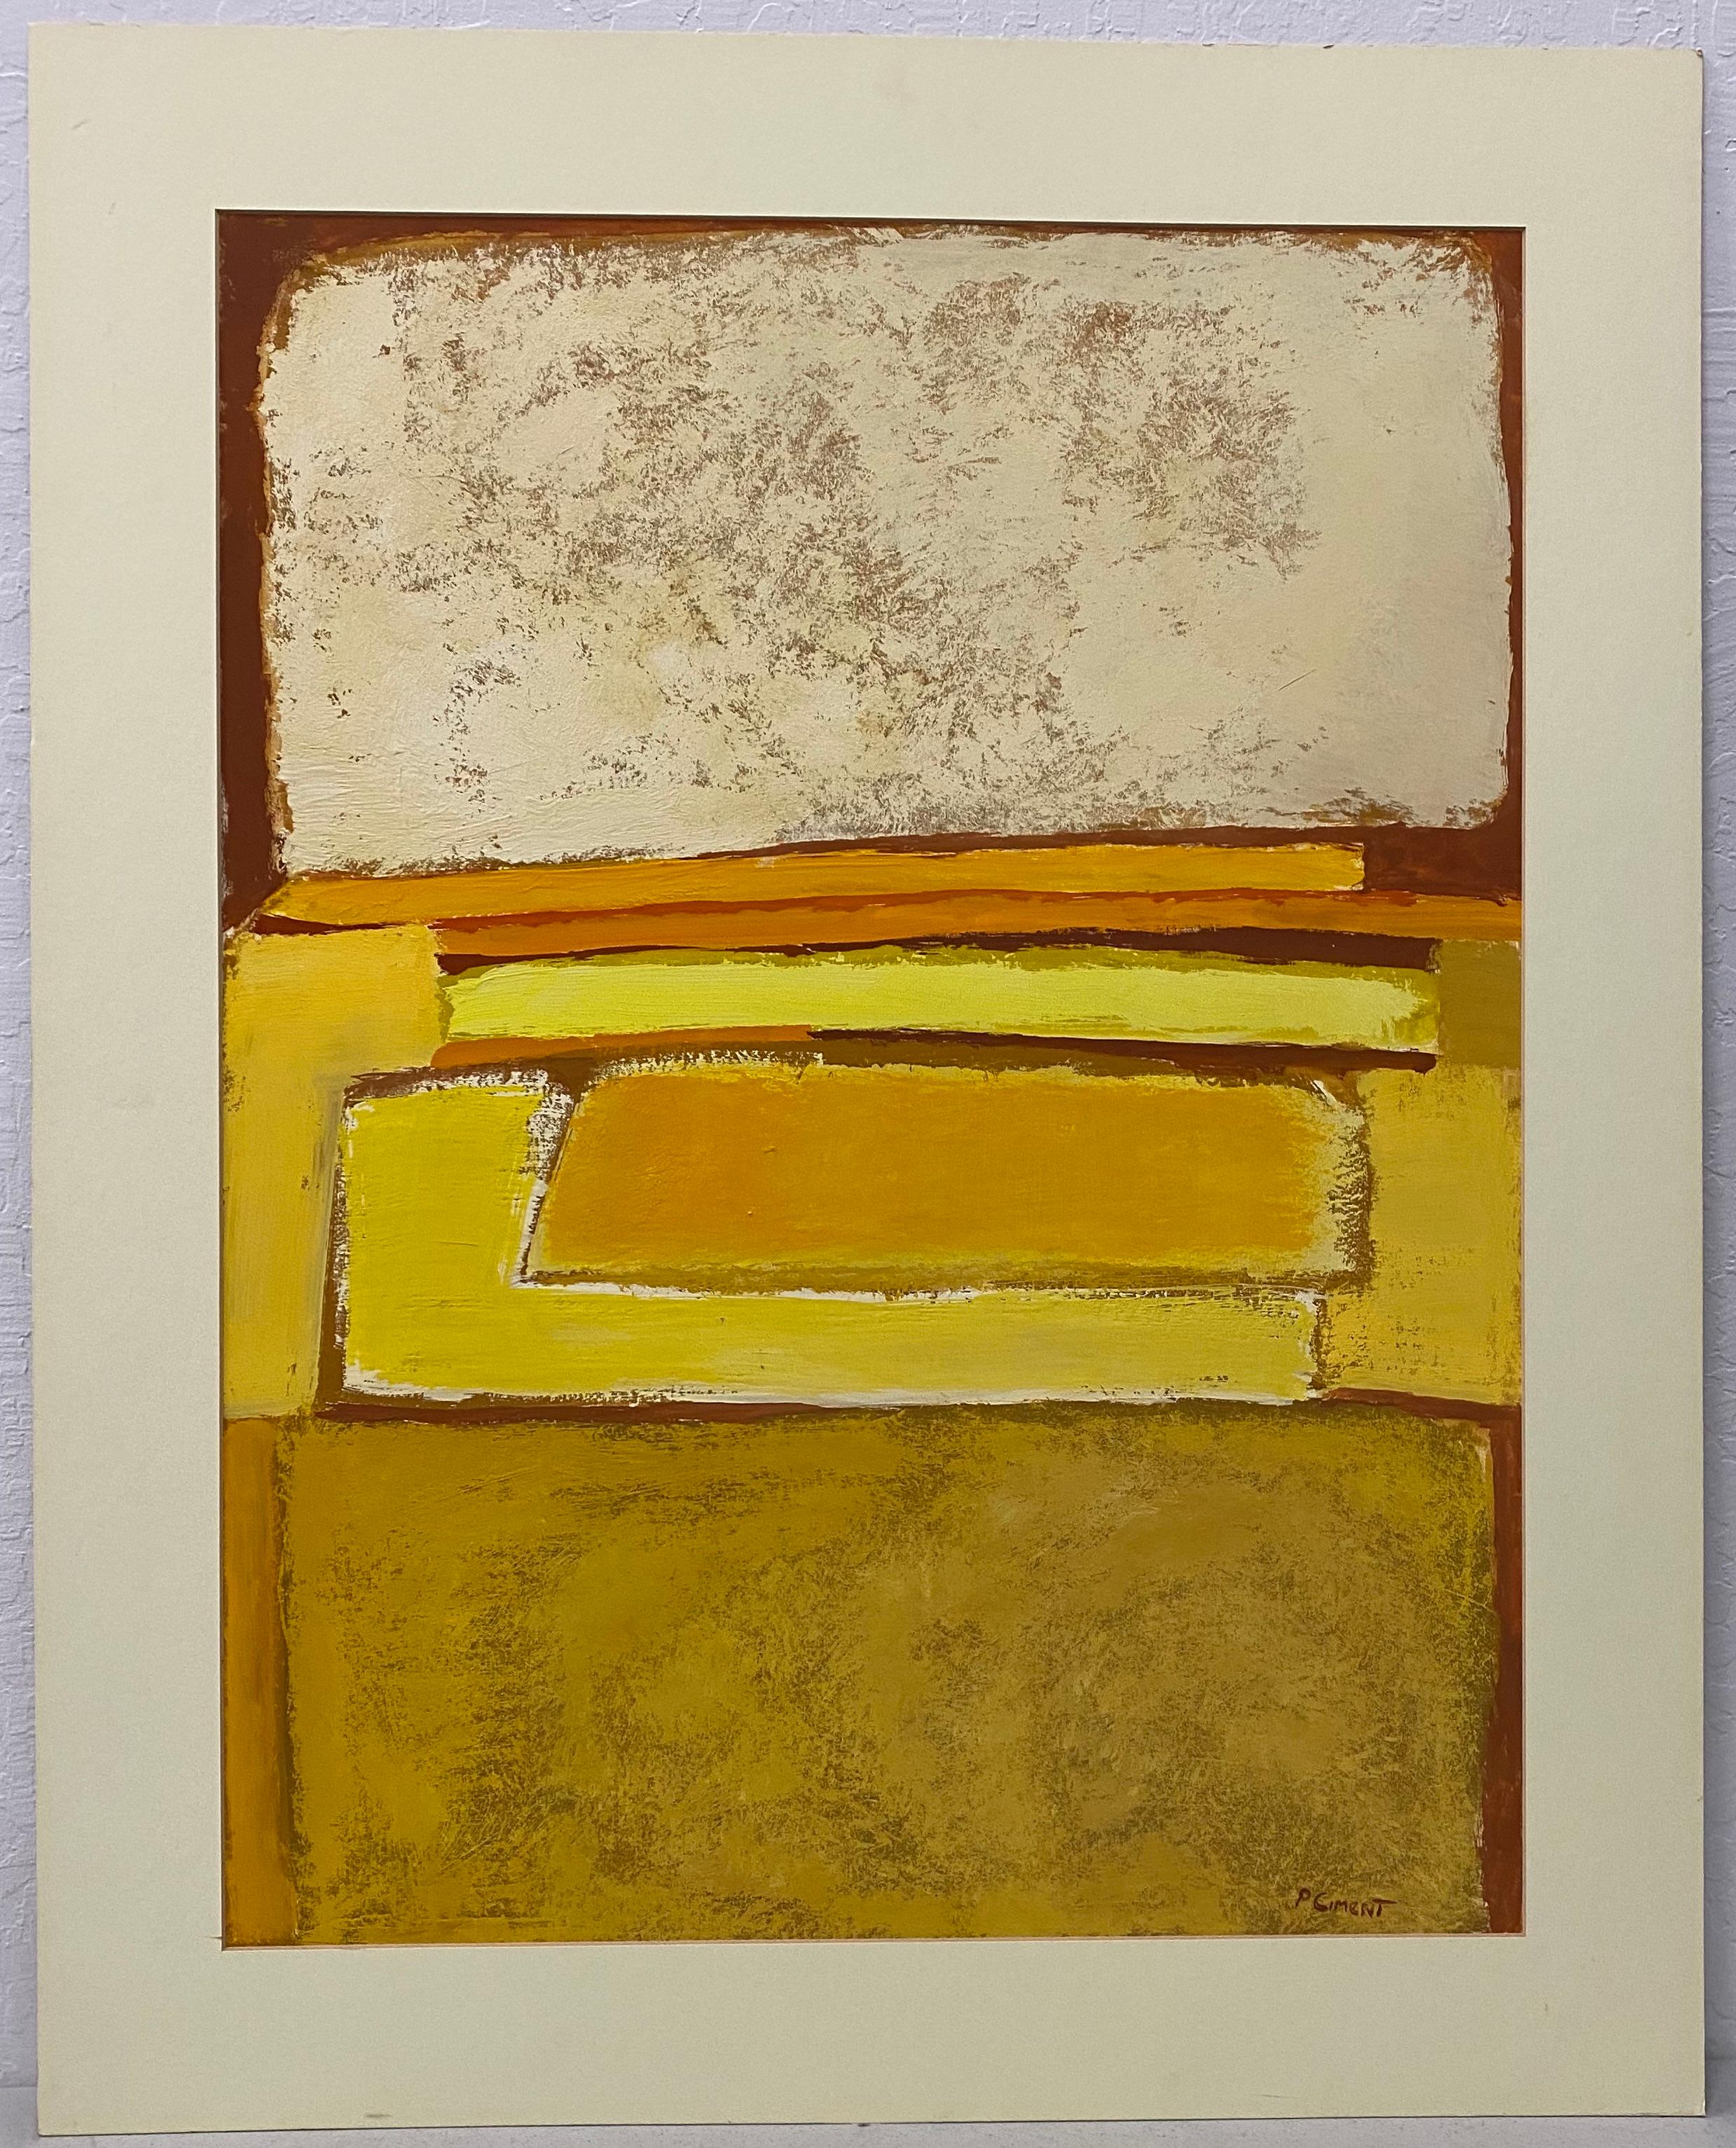 1970s Abstract Oil Painting by San Francisco Artist Phyllis Ciment

Created with oils on paper affixed to mat.

Using wide brush strokes and bold, rich colors, Ciment created an abstract painting that still looks great 40+ years after it was